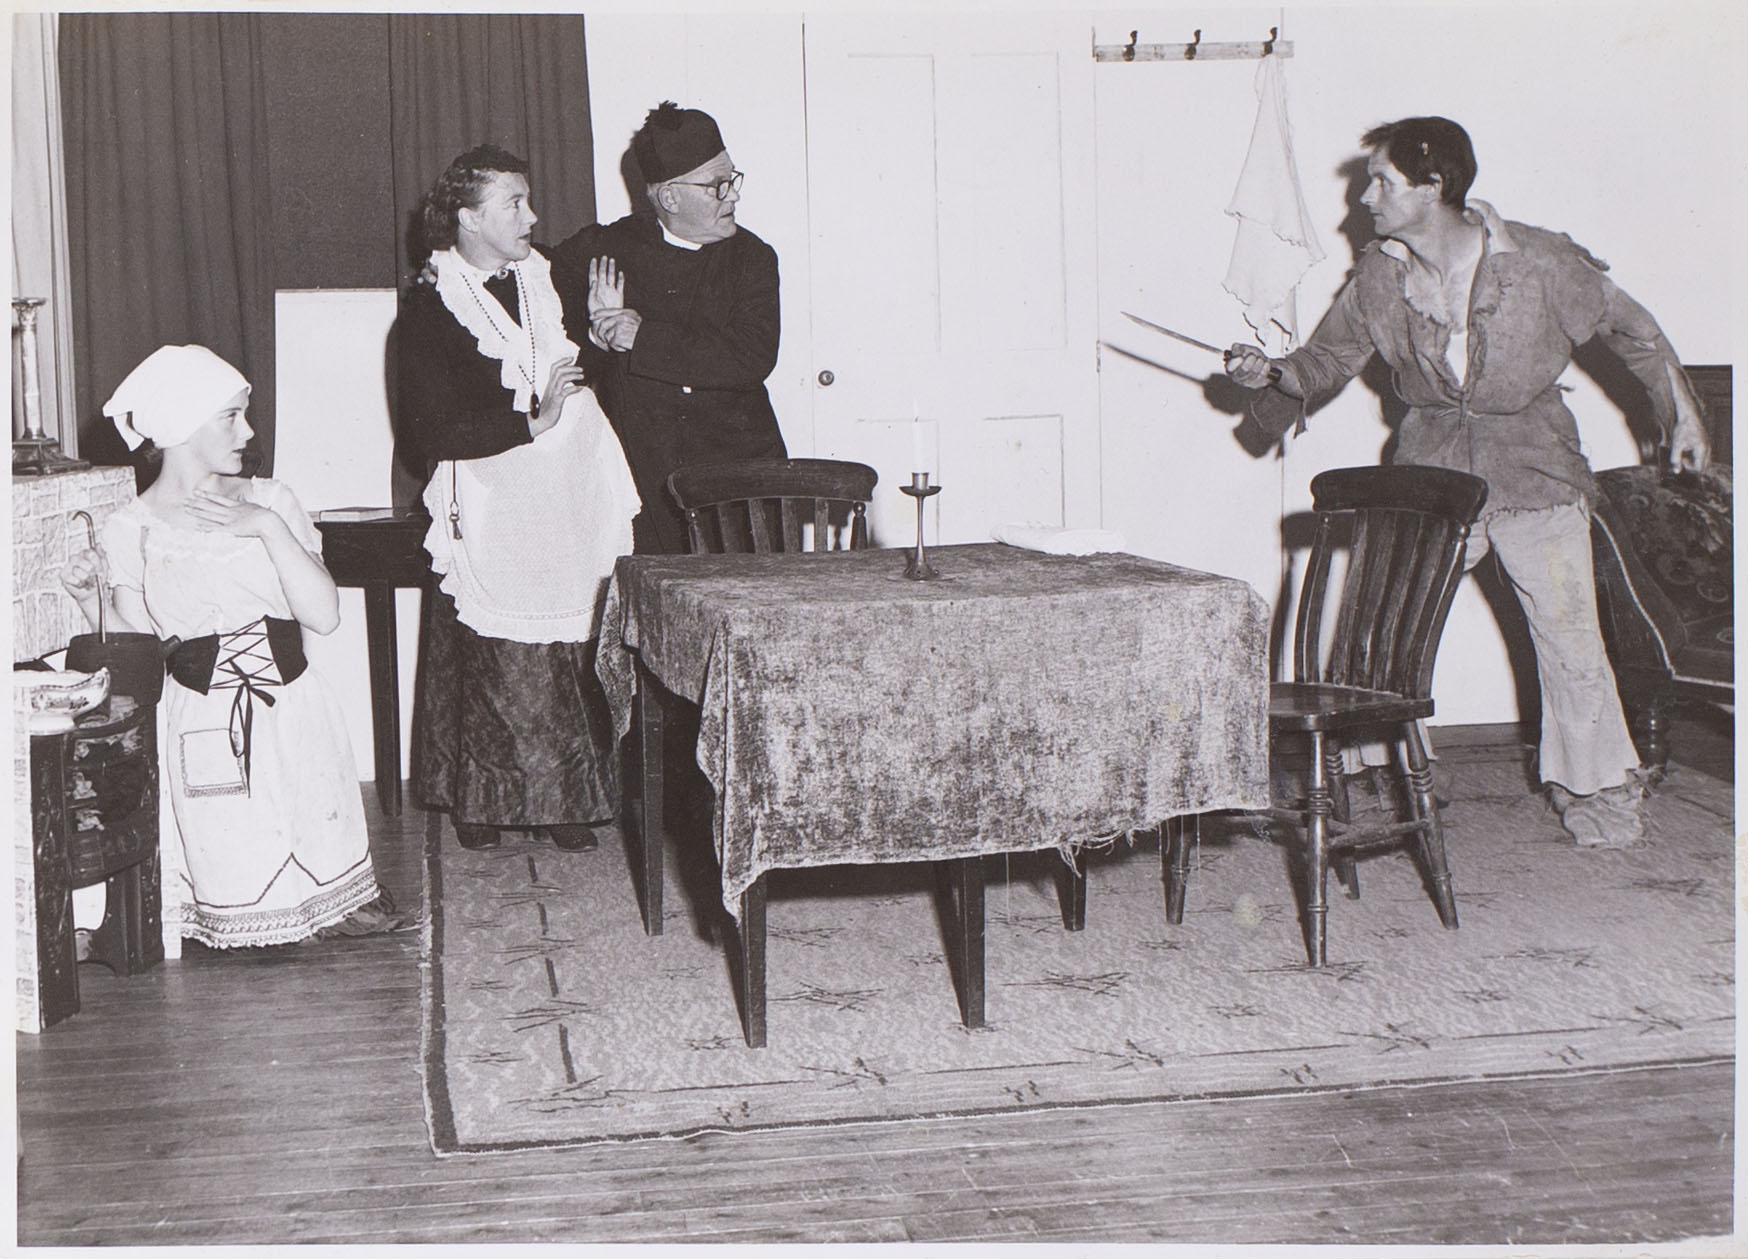 Photograph of a scene from the play 'Bishop's Candlesticks' presented by Bishopsteignton Players